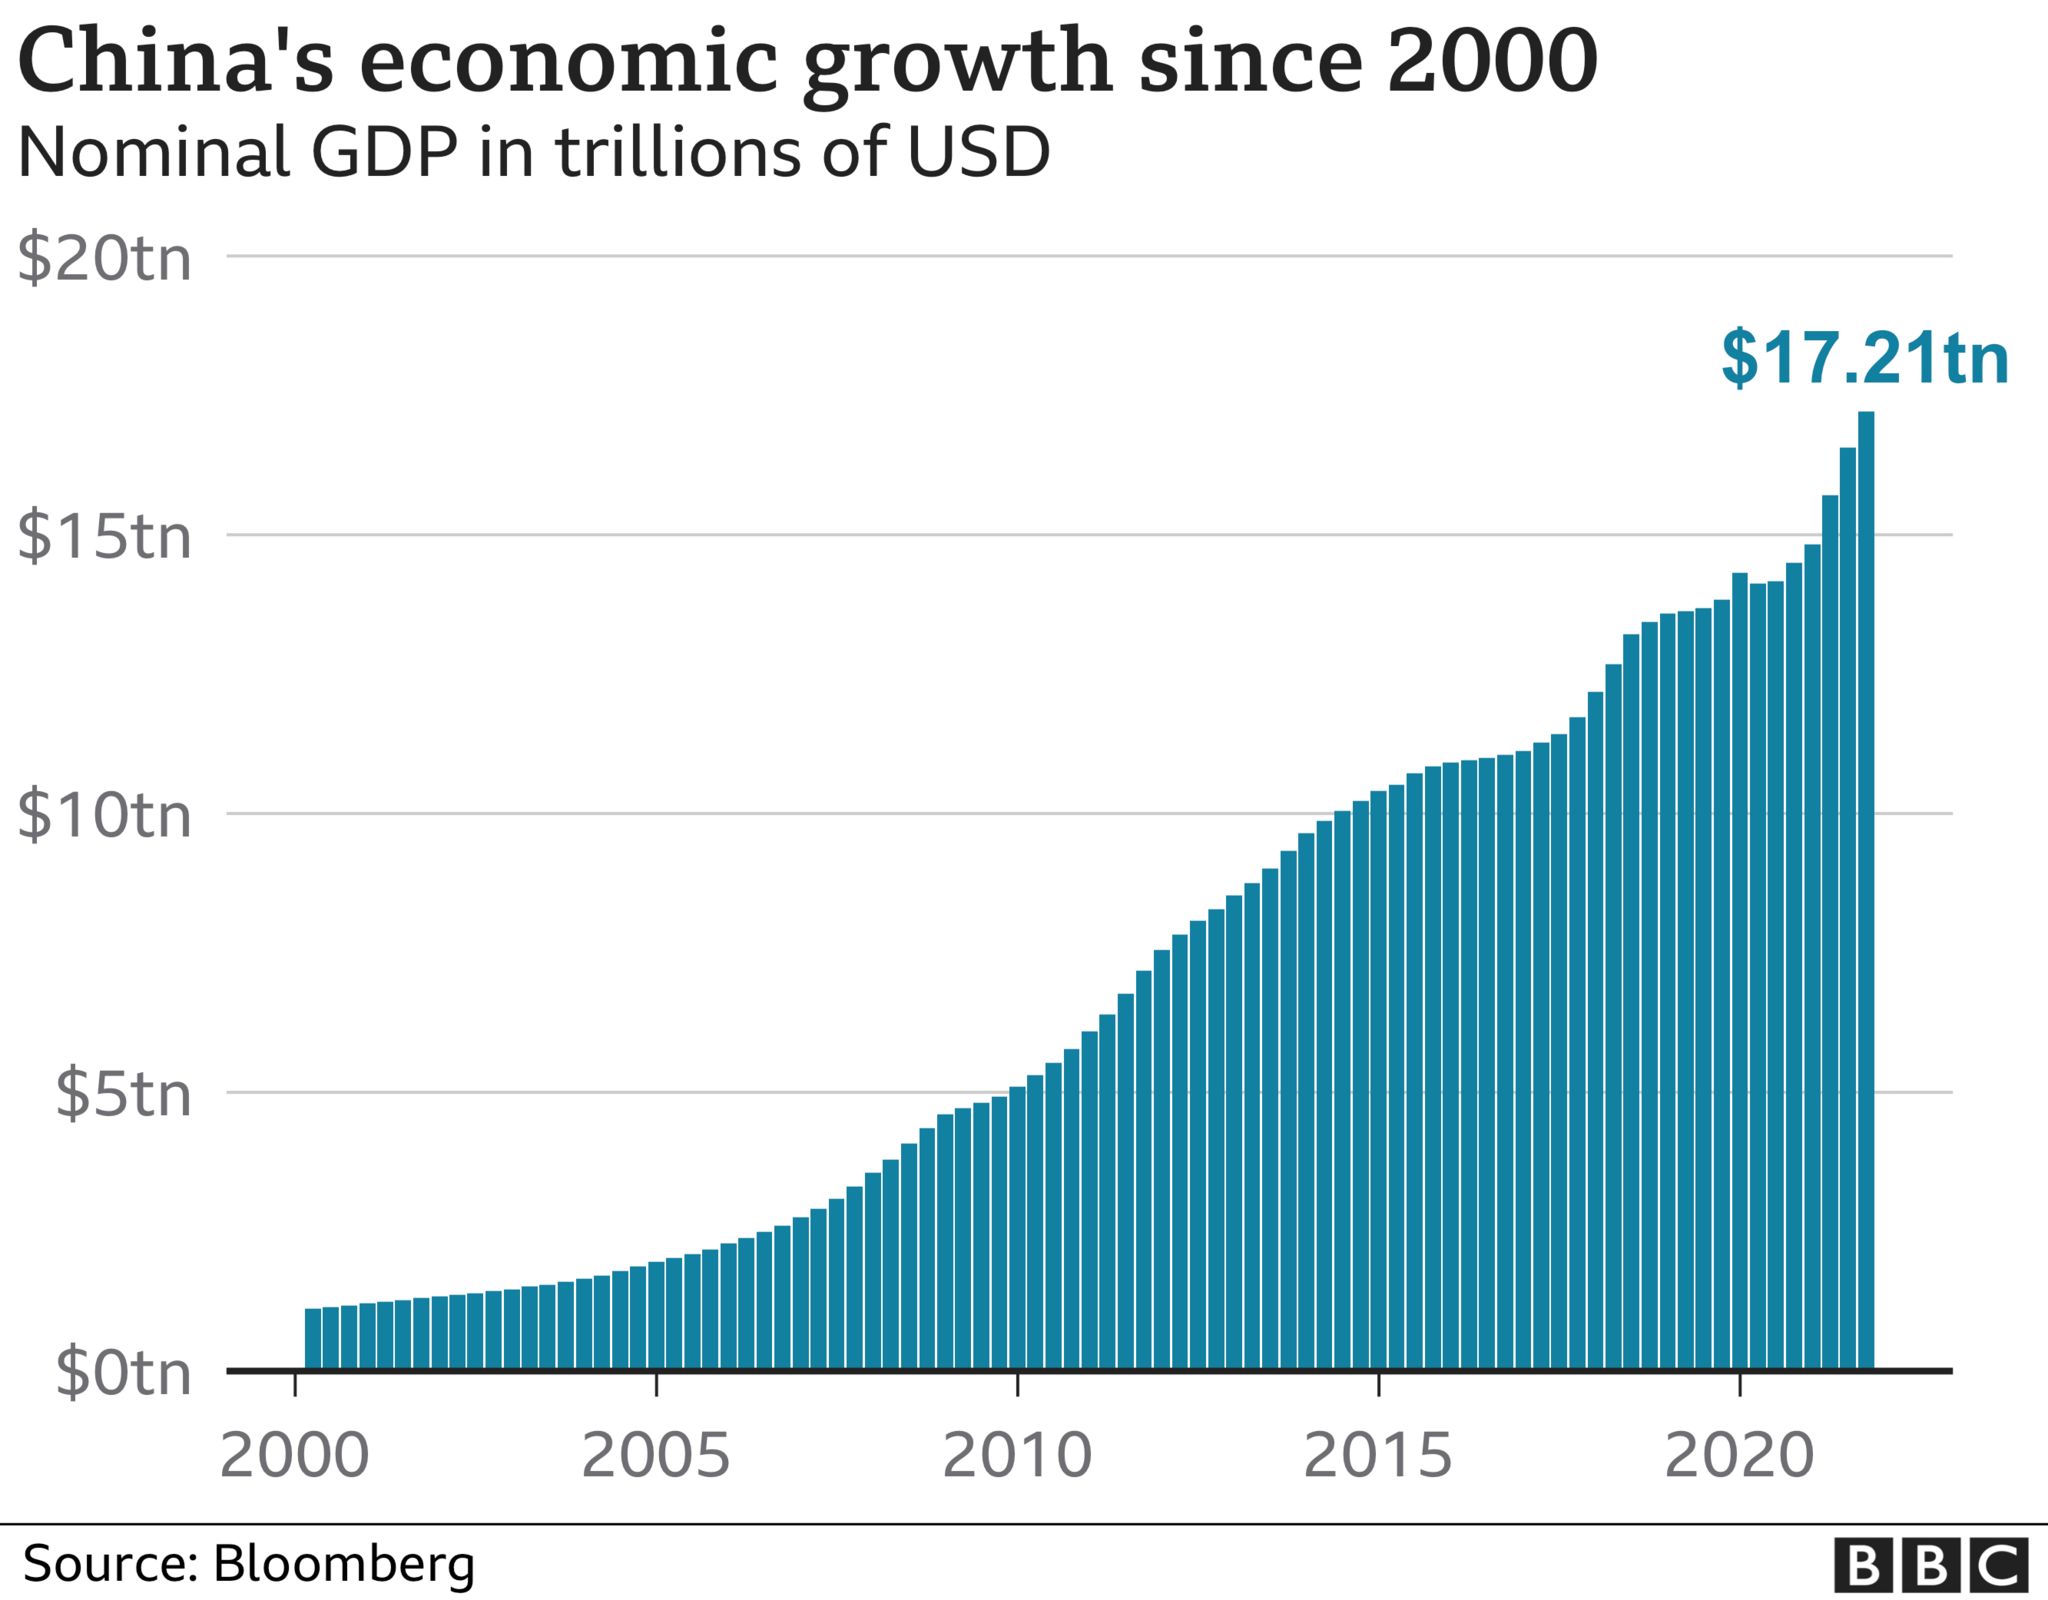 Chart showing China's economic growth since 2000